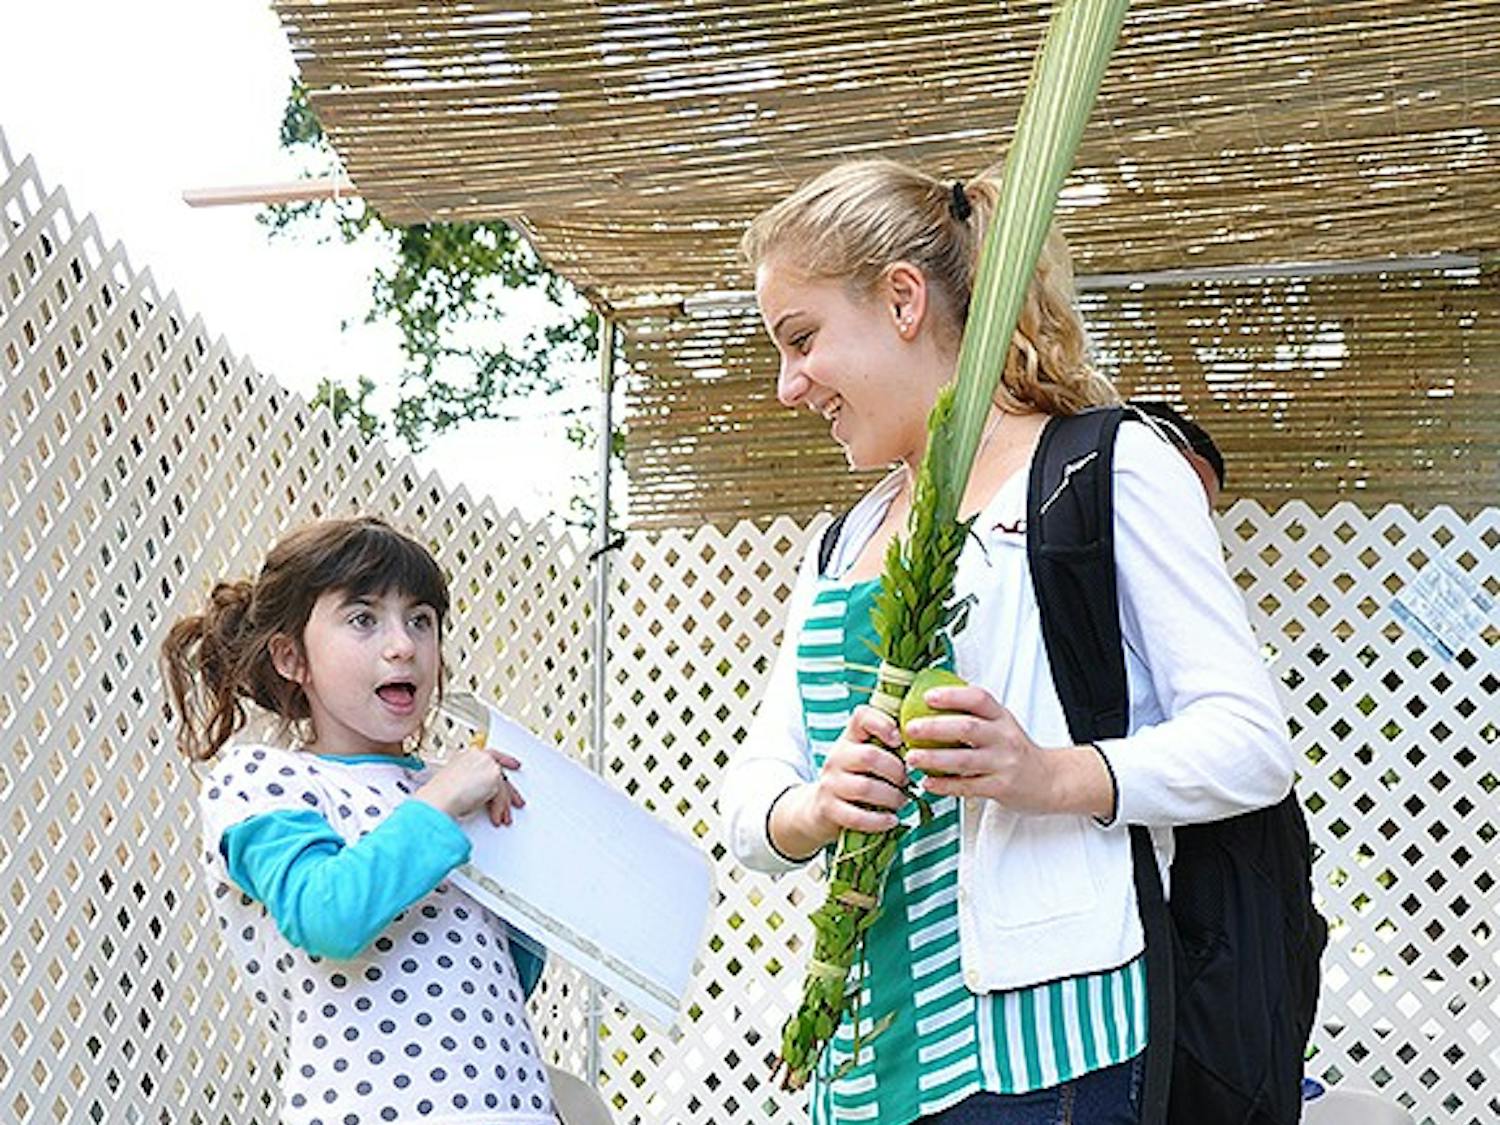 Chaya Bluming (left) and Adi Blanc (right) recite a Jewish blessing in the traveling sukkah.